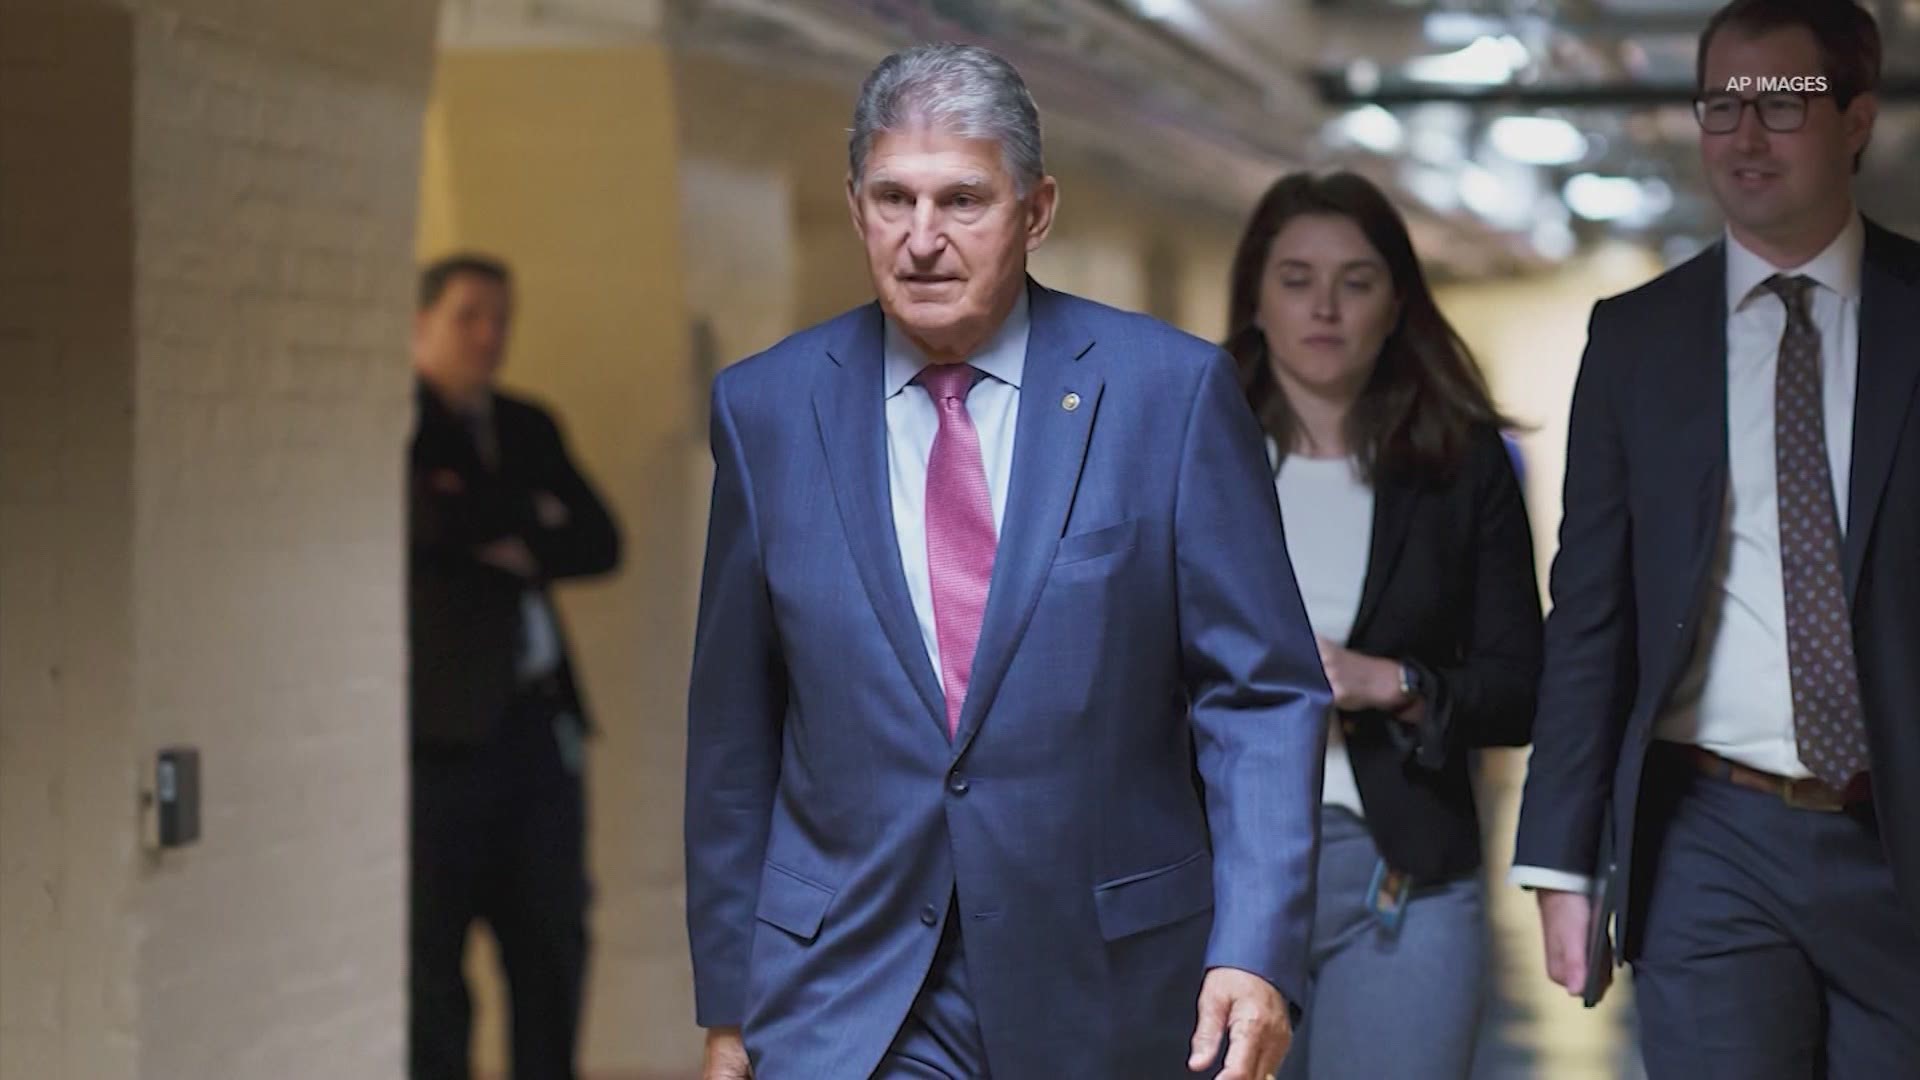 Sen. Joe Manchin is considered to be the swing vote on a federal voting bill.